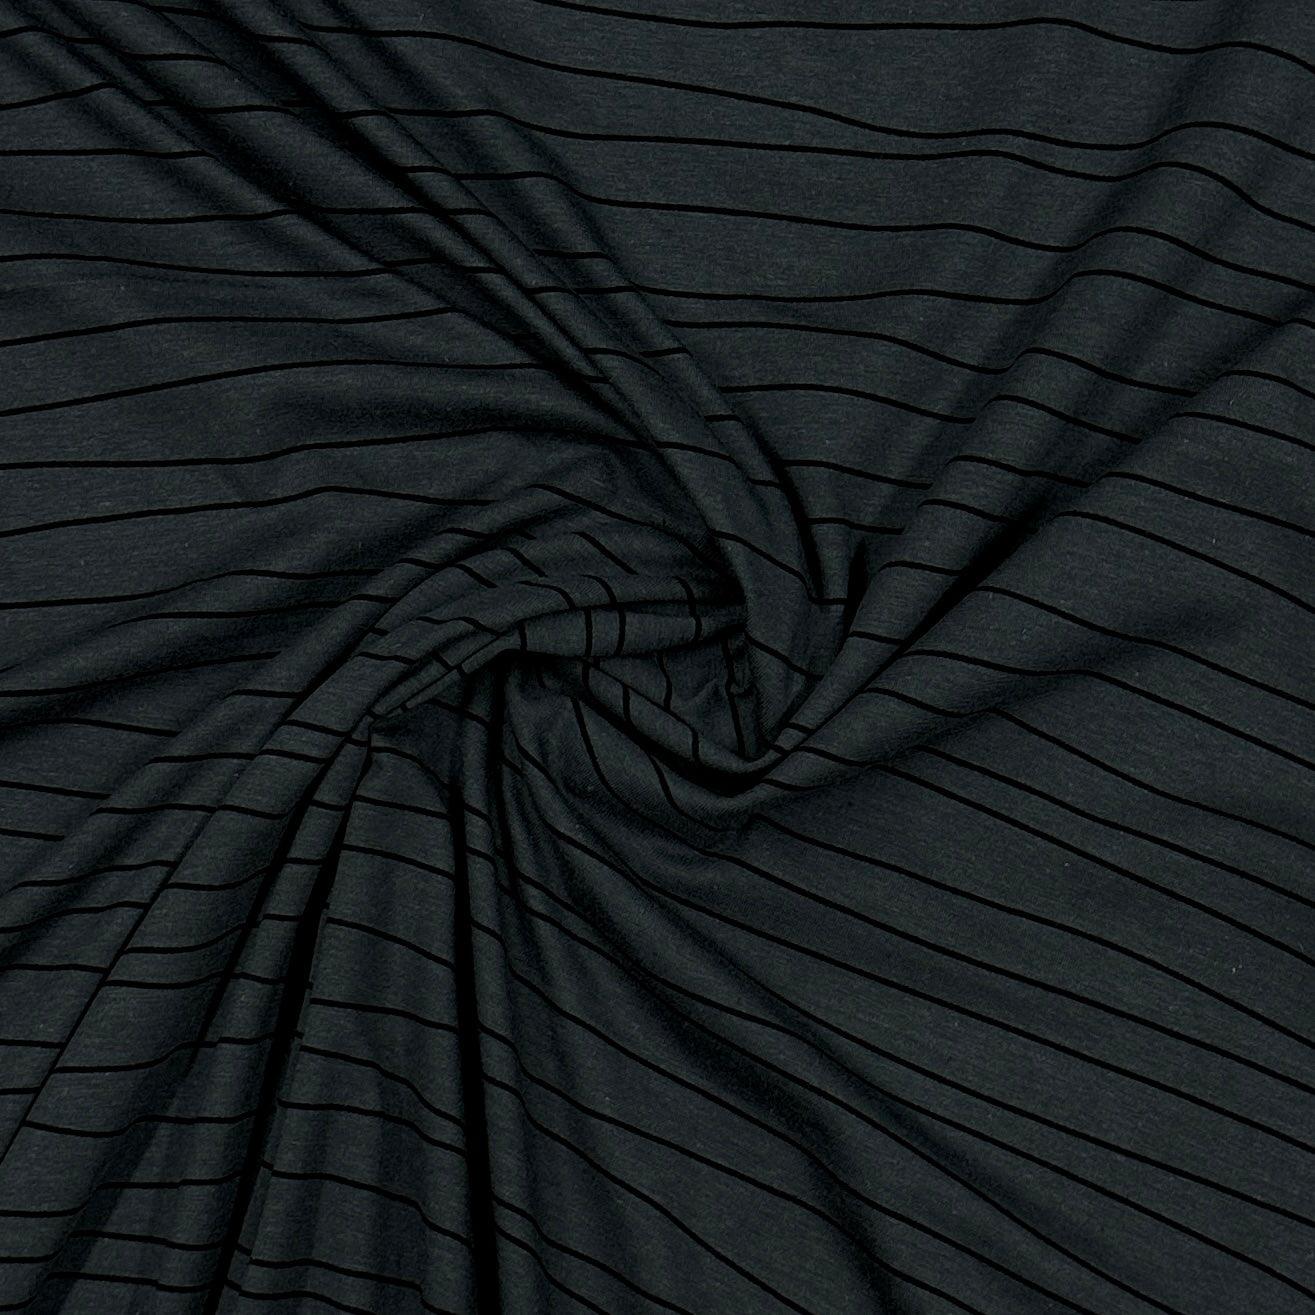 Wavy Black Lines on Green Bamboo/Spandex Jersey Fabric - 265 GSM - Knit in the USA - Nature's Fabrics